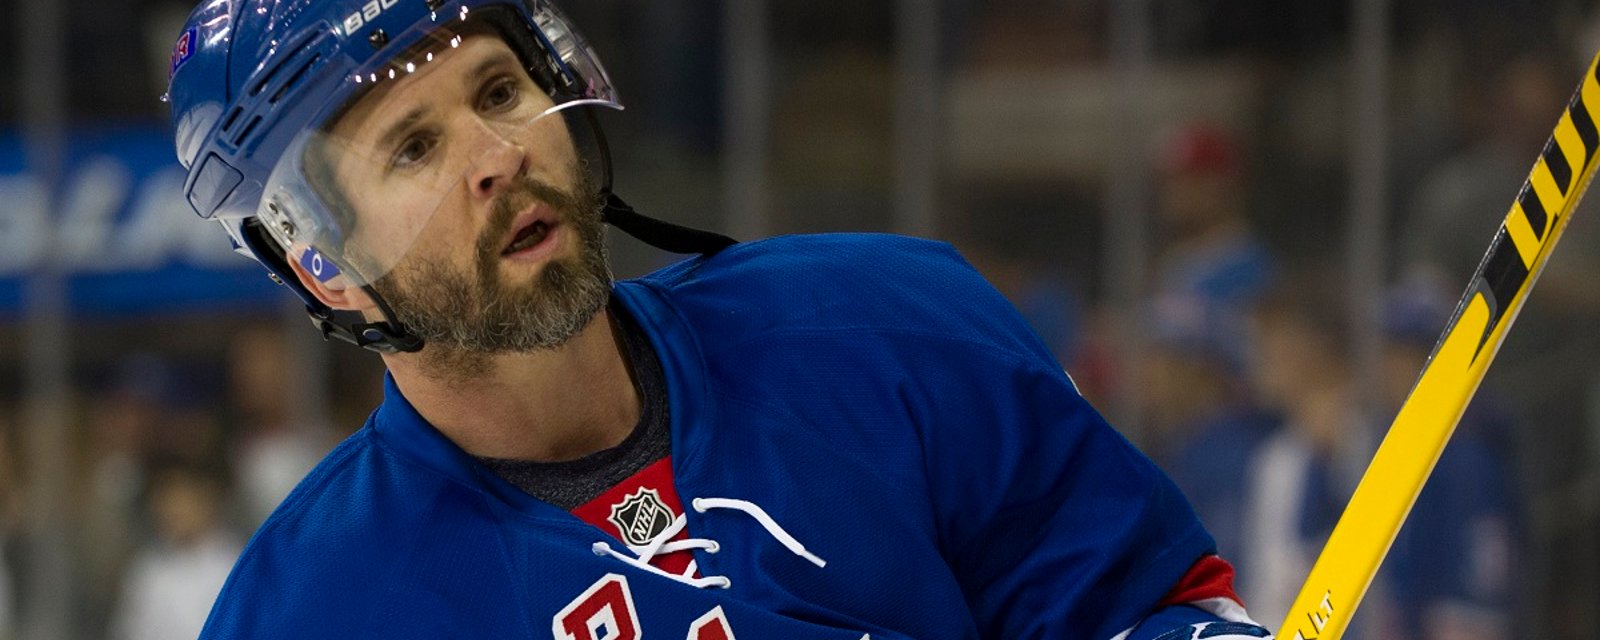 Rumor: Former NHL star Martin St. Louis may be making big moves behind the scenes.